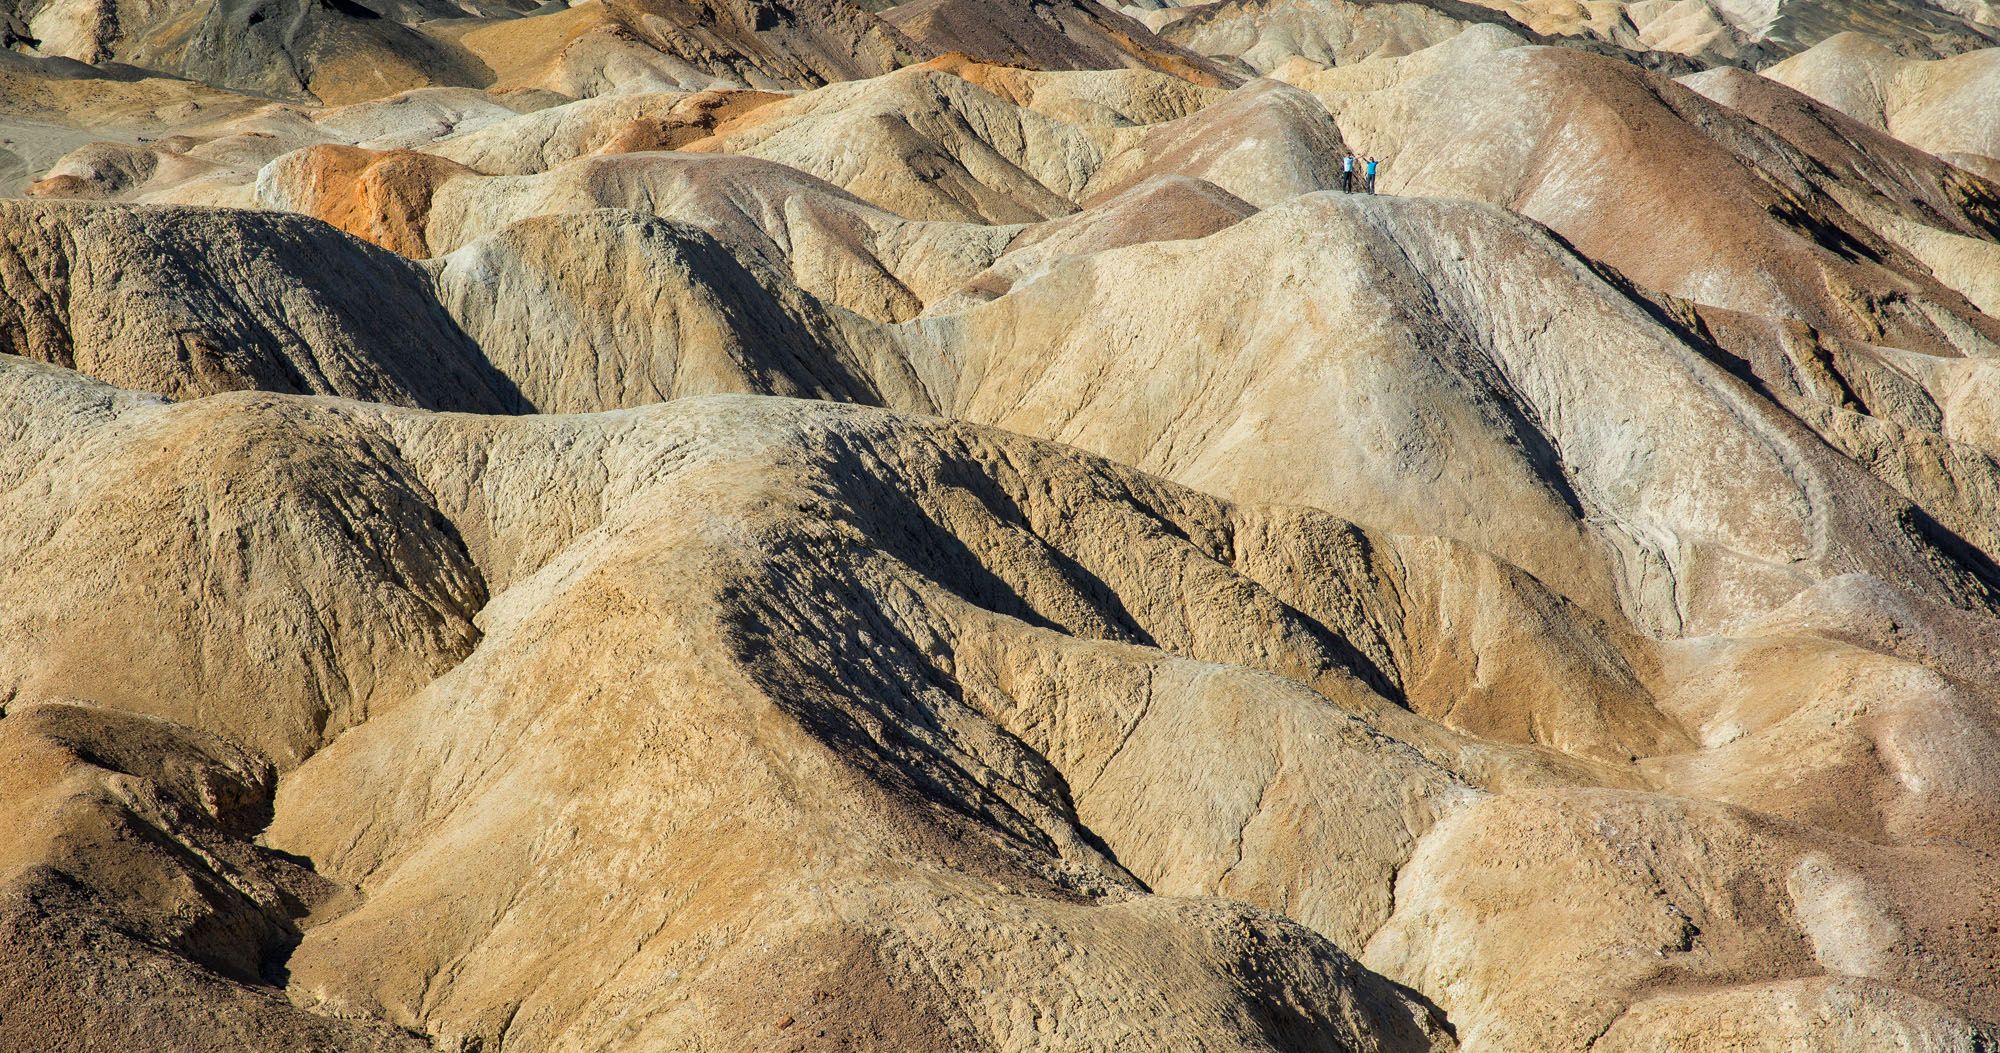 Featured image for “5 Reasons Why Death Valley Should be the Next National Park You Visit”